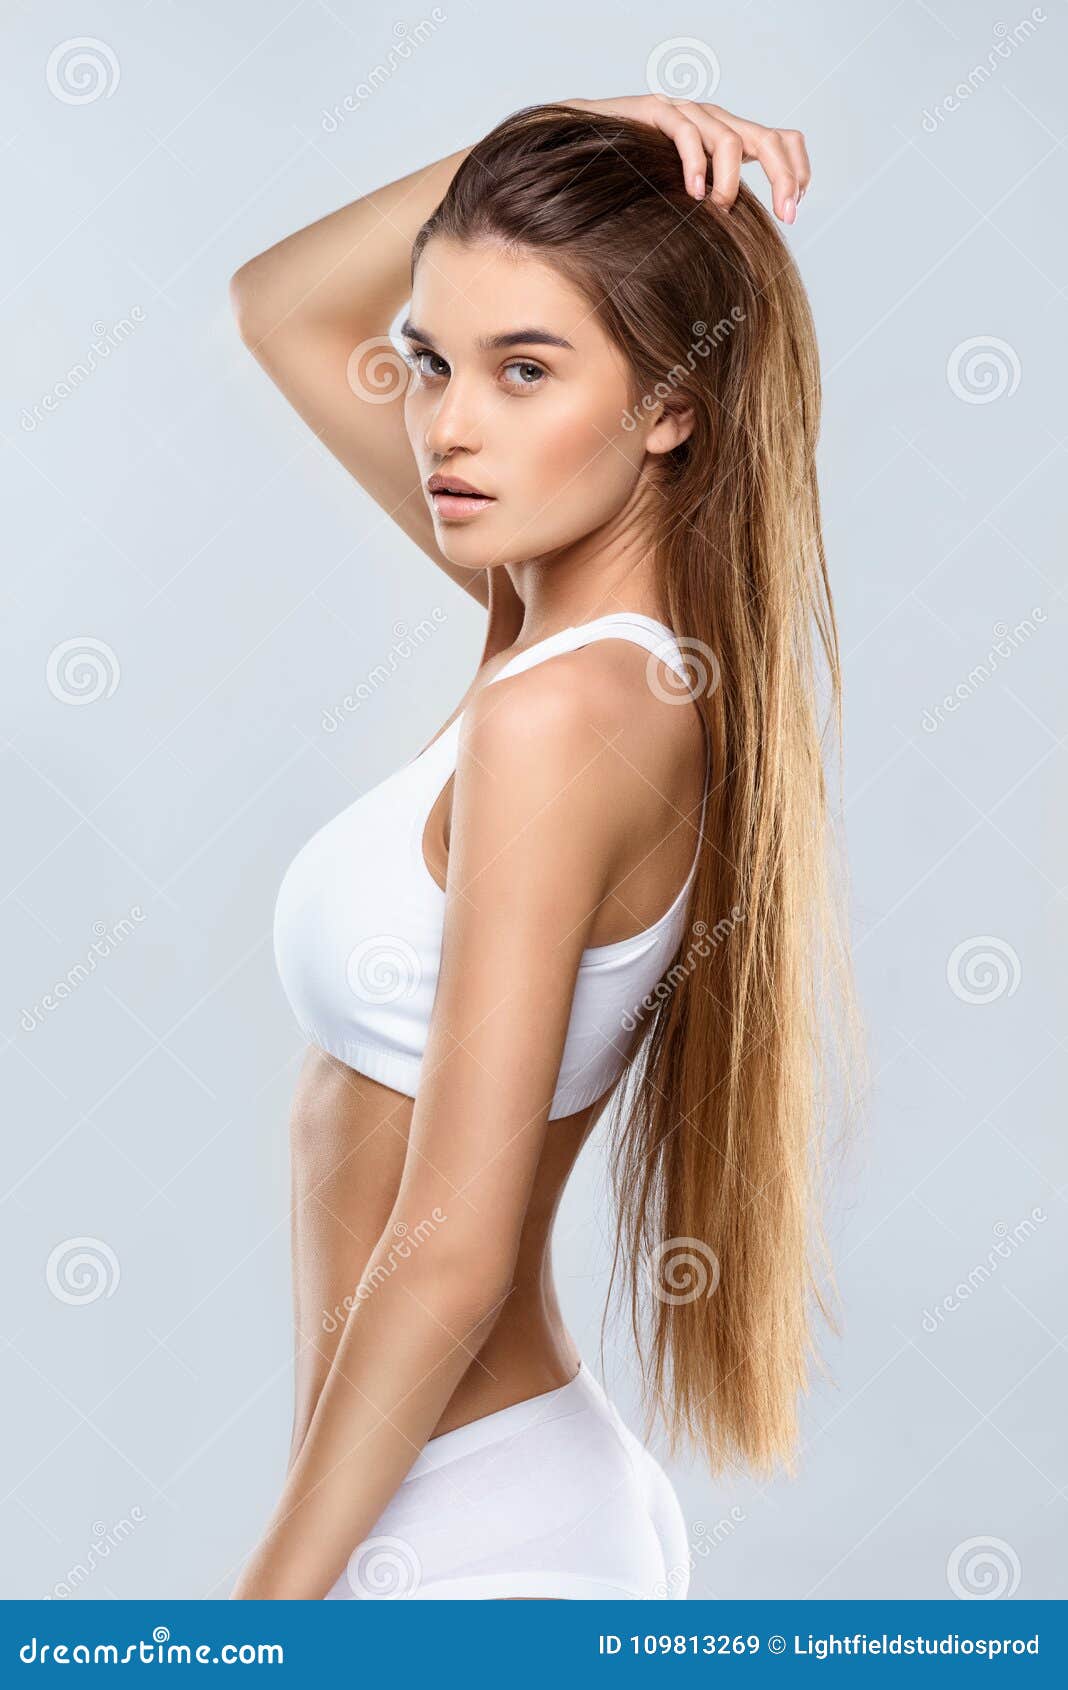 Attractive Young Slim Woman Stock Image - Image of beautiful